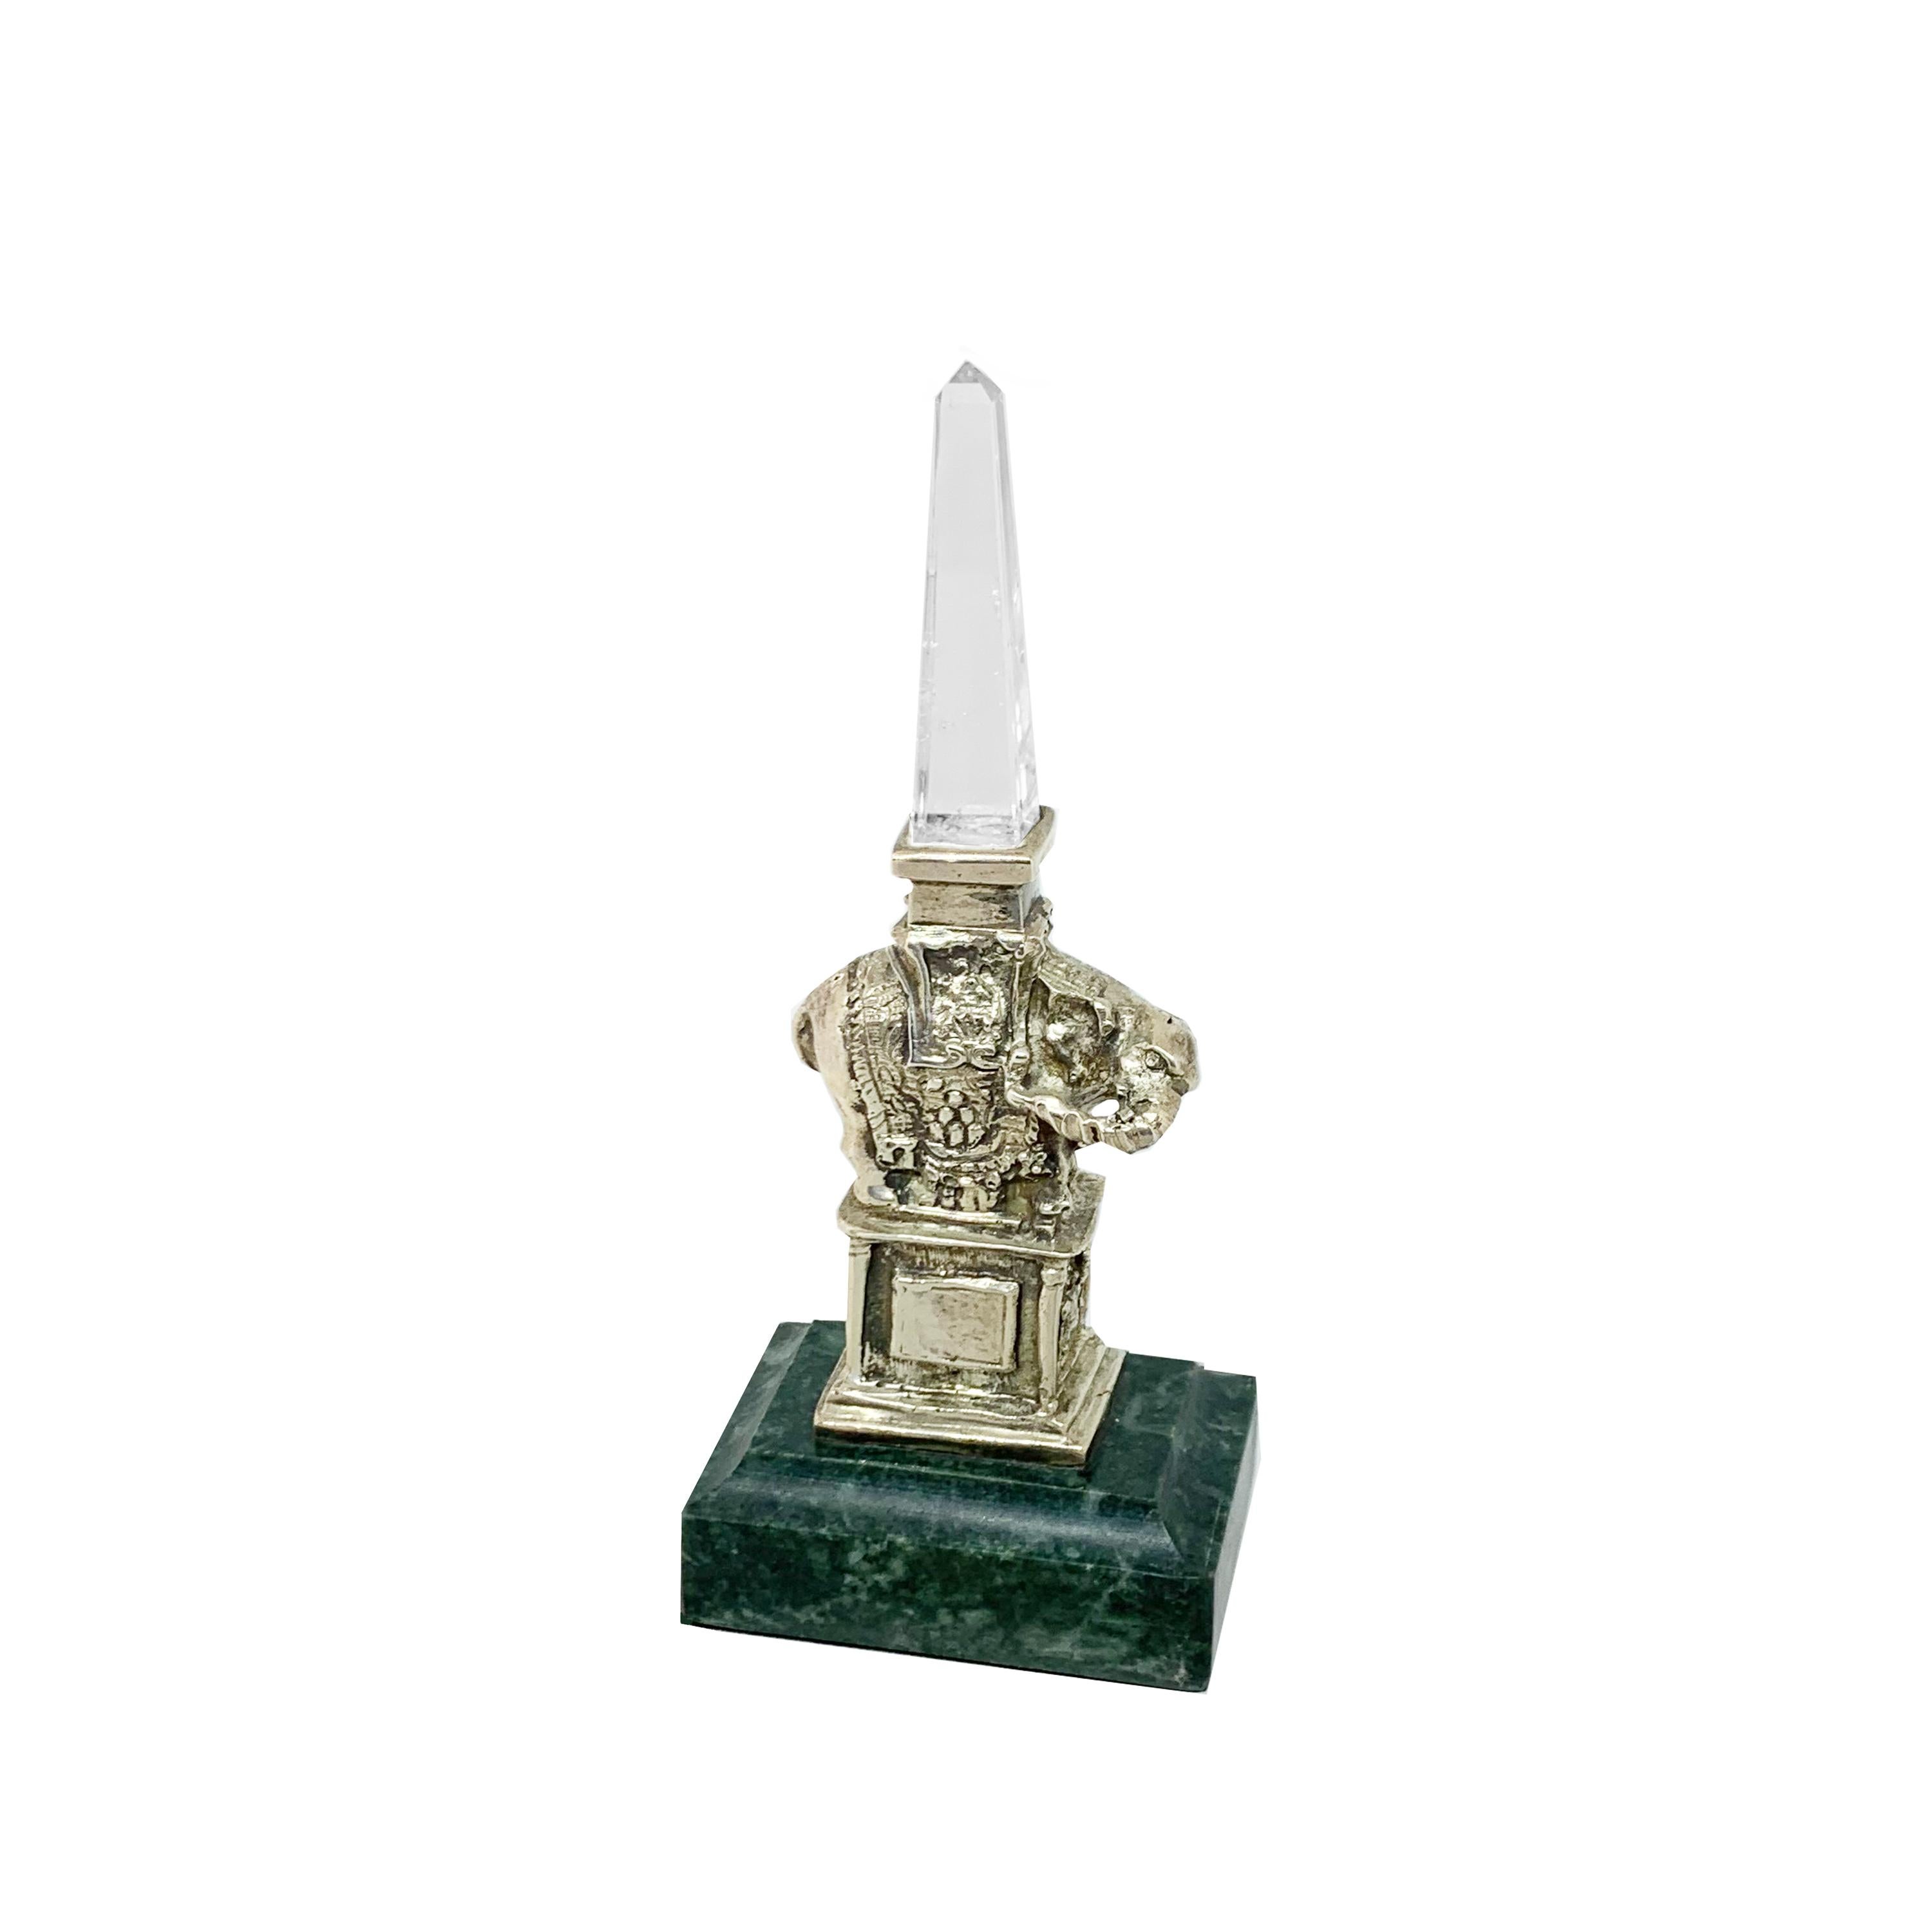 This sterling silver and rock crystal statue was made by our talented Roman artisans, and reproduces a famous monument in Rome.
Adjacent to the Pantheon, in front of the Dominican church “Santa Maria Sopra La Minerva” (St.Mary Over Minerva), lies